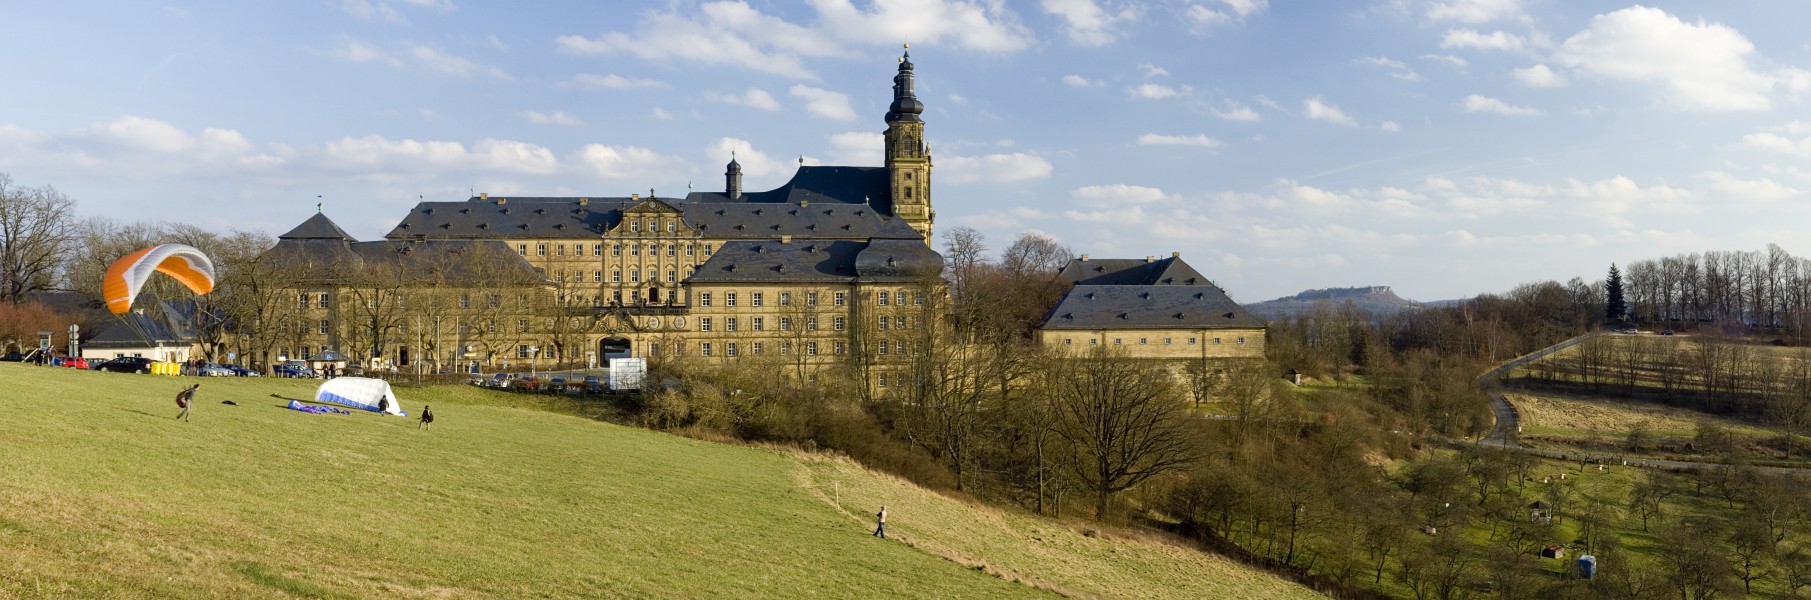 Kloster Banz Pano001